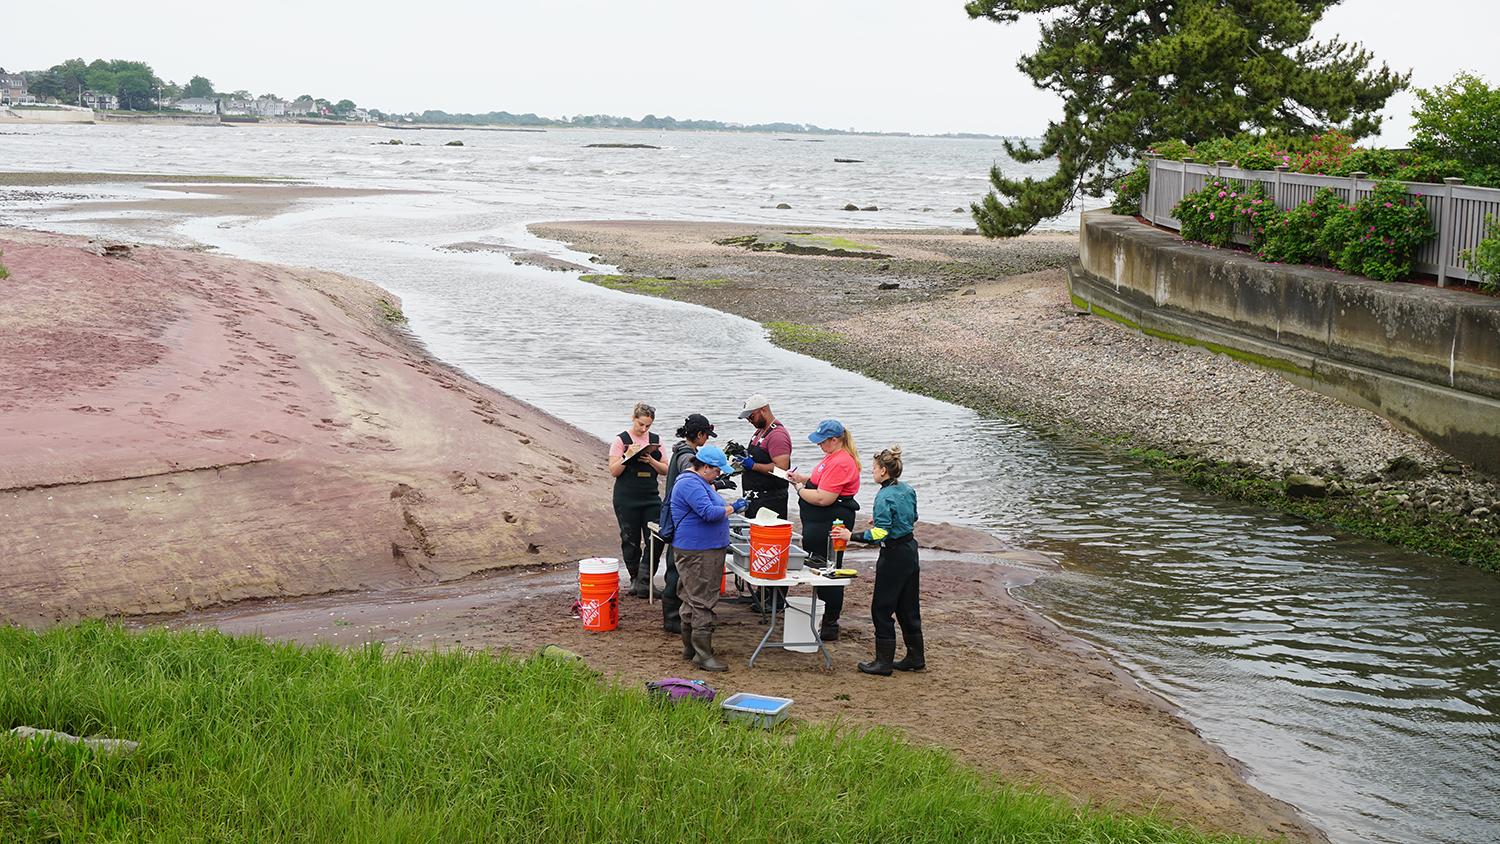 Scientists count and measure oysters at Fence Creek in Madison, Connecticut. Photo Credit: NOAA Fisheries/Kristen Jabanoski